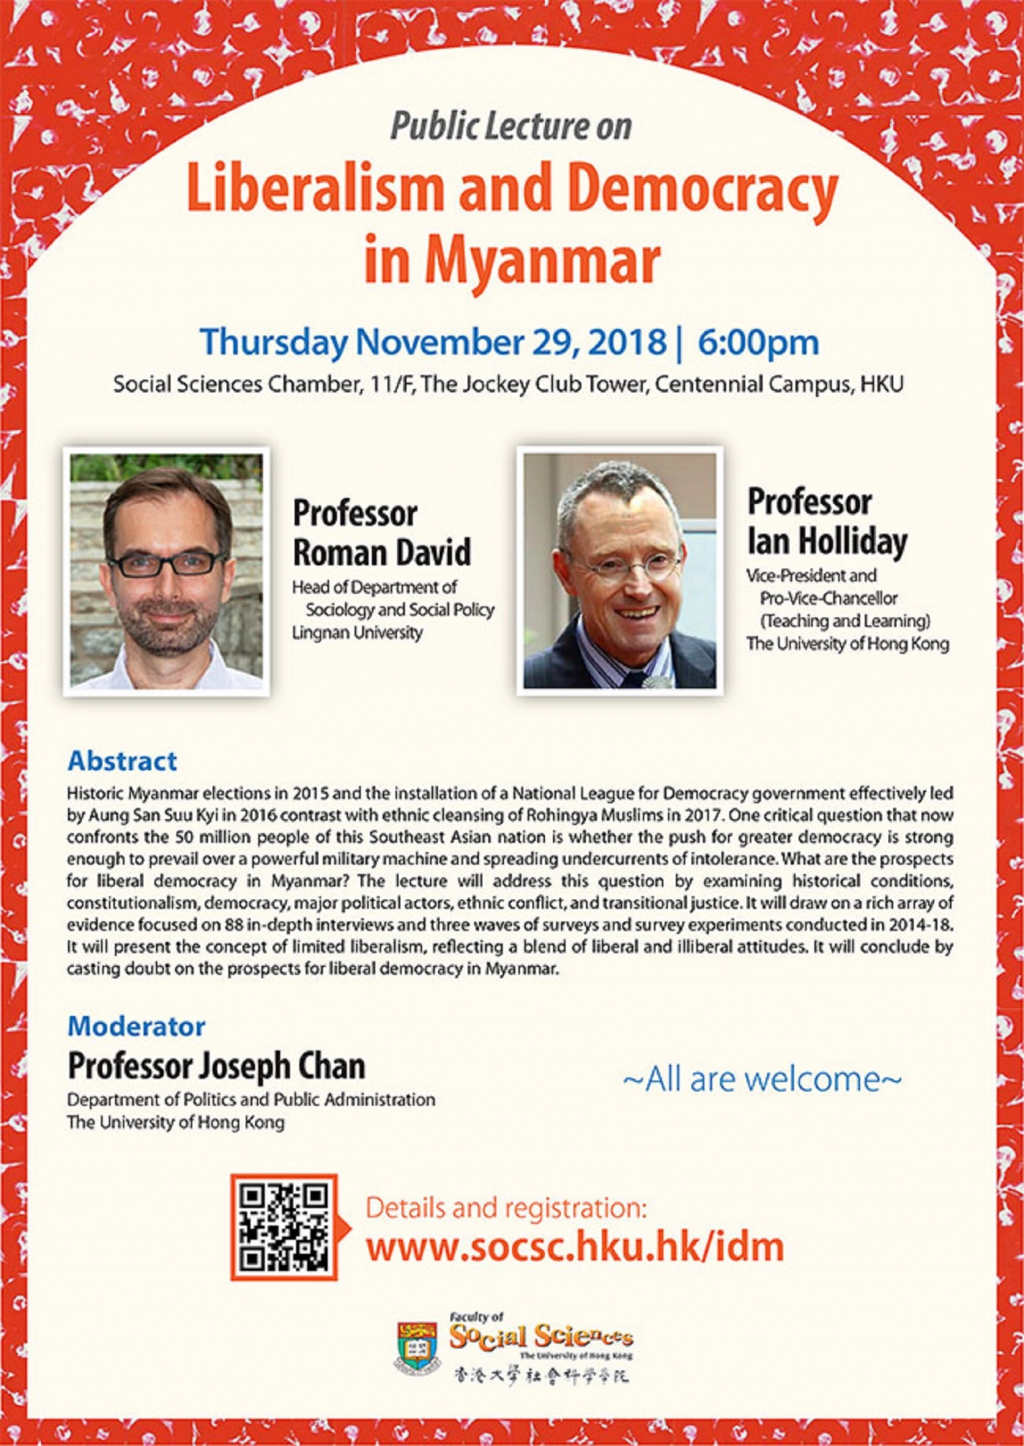 Public Lecture on Liberalism and Democracy in Myanmar